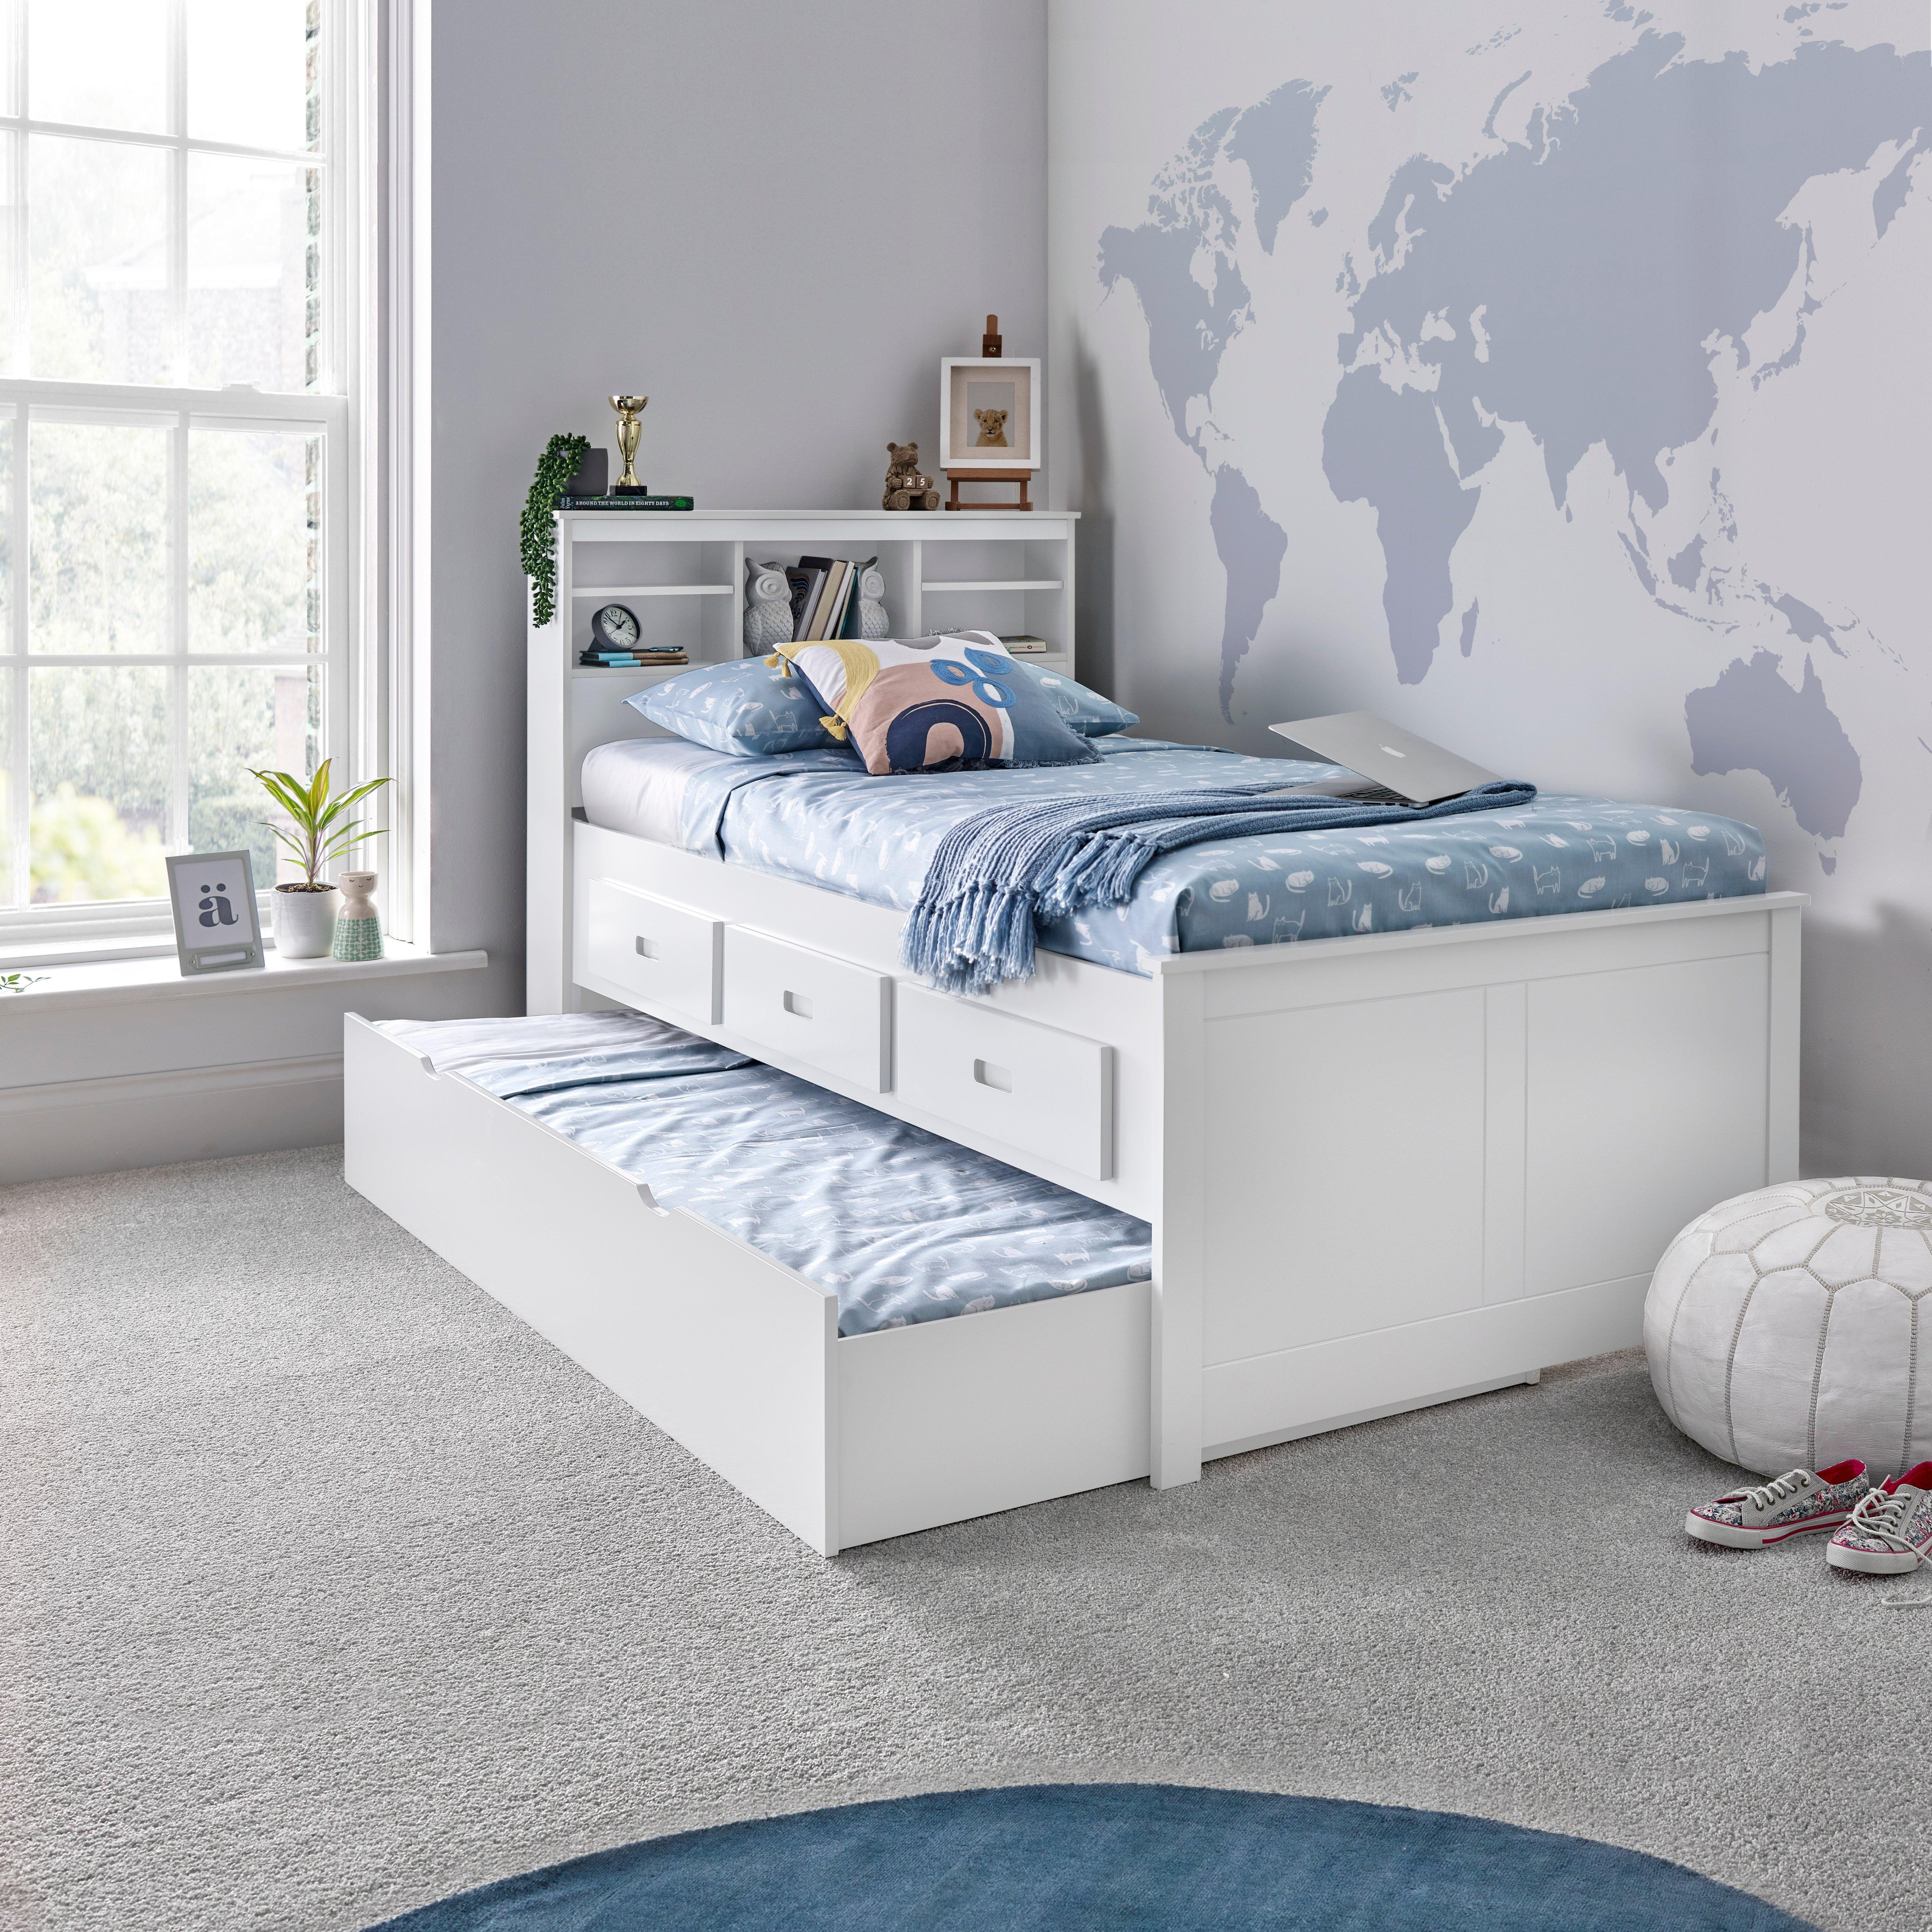 Venus Guest Bed With Drawers And Trundle With Pocket Mattresses - image 1